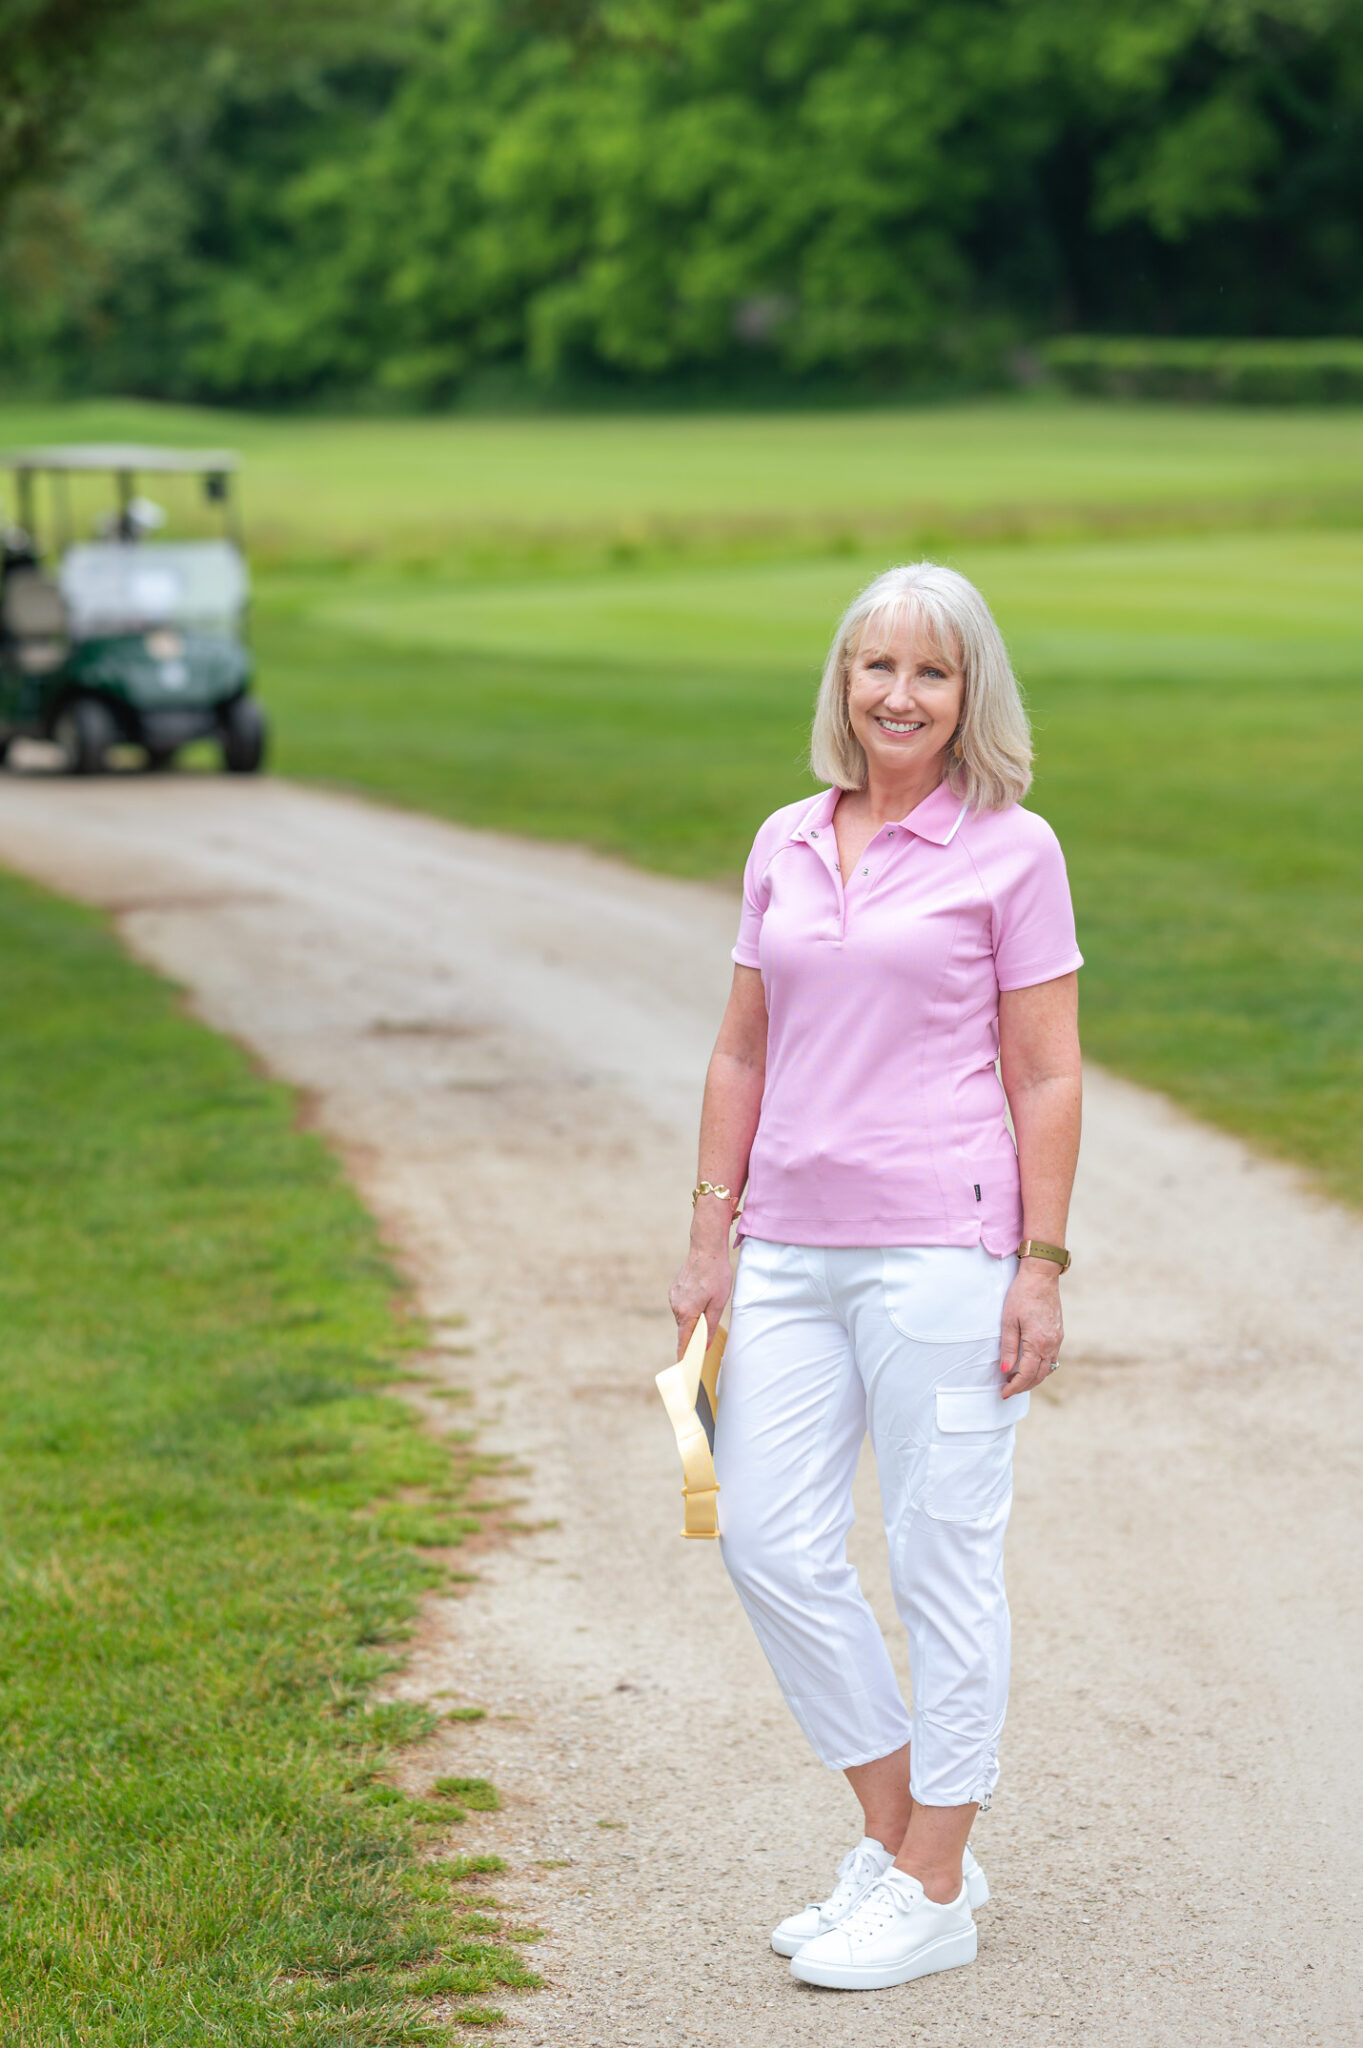 Women's Activewear for Golf & Other Activities - Dressed for My Day